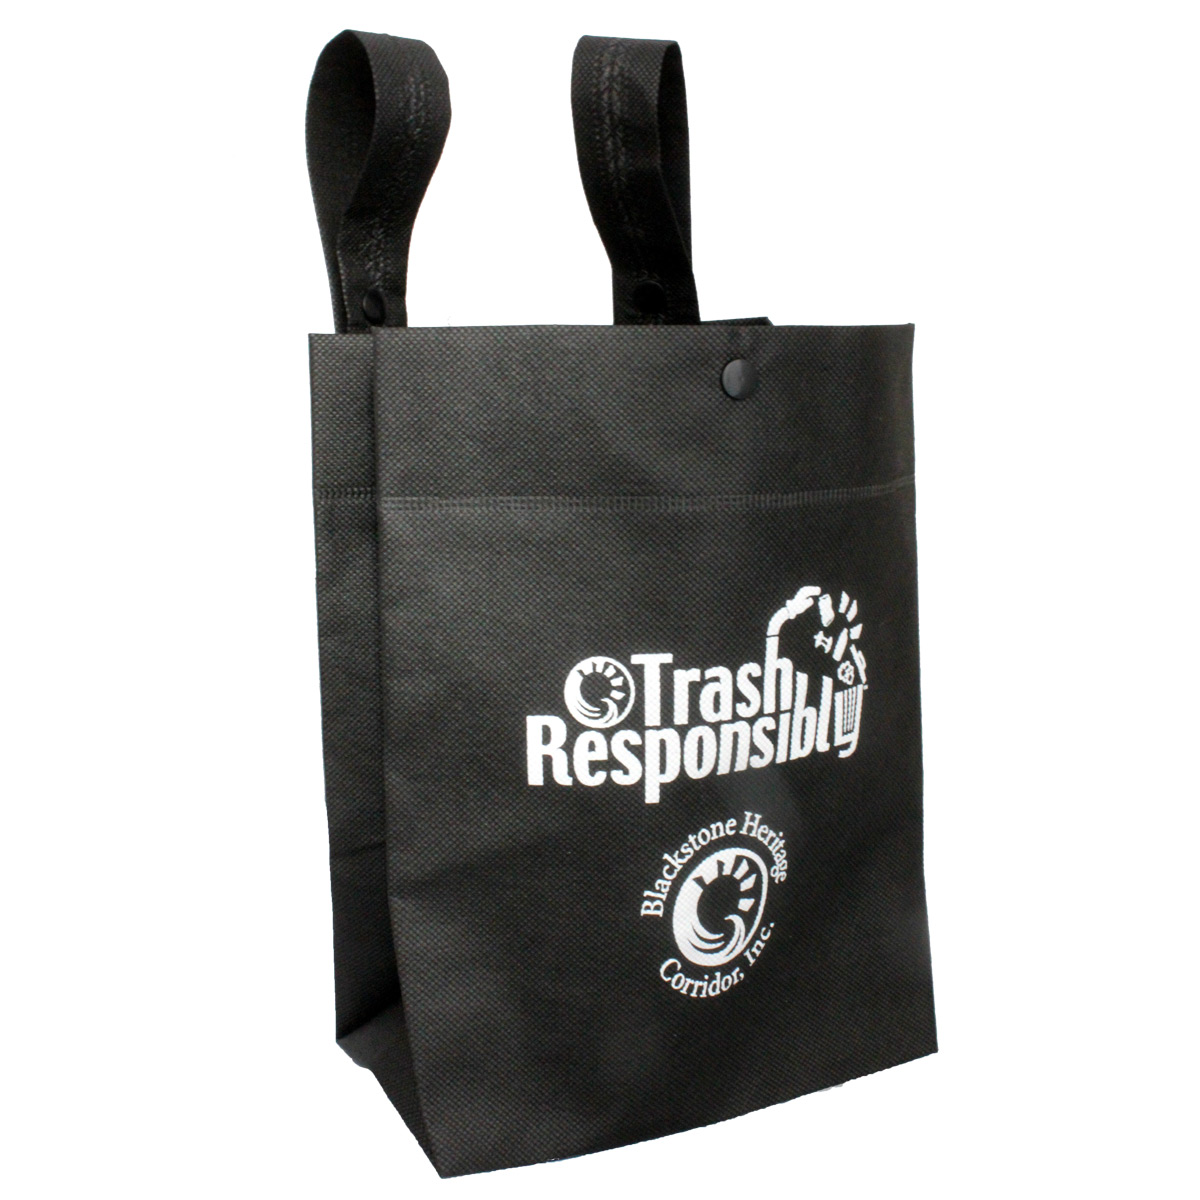 Car Litter Bag BHC Trash Responsibly Put one in your car